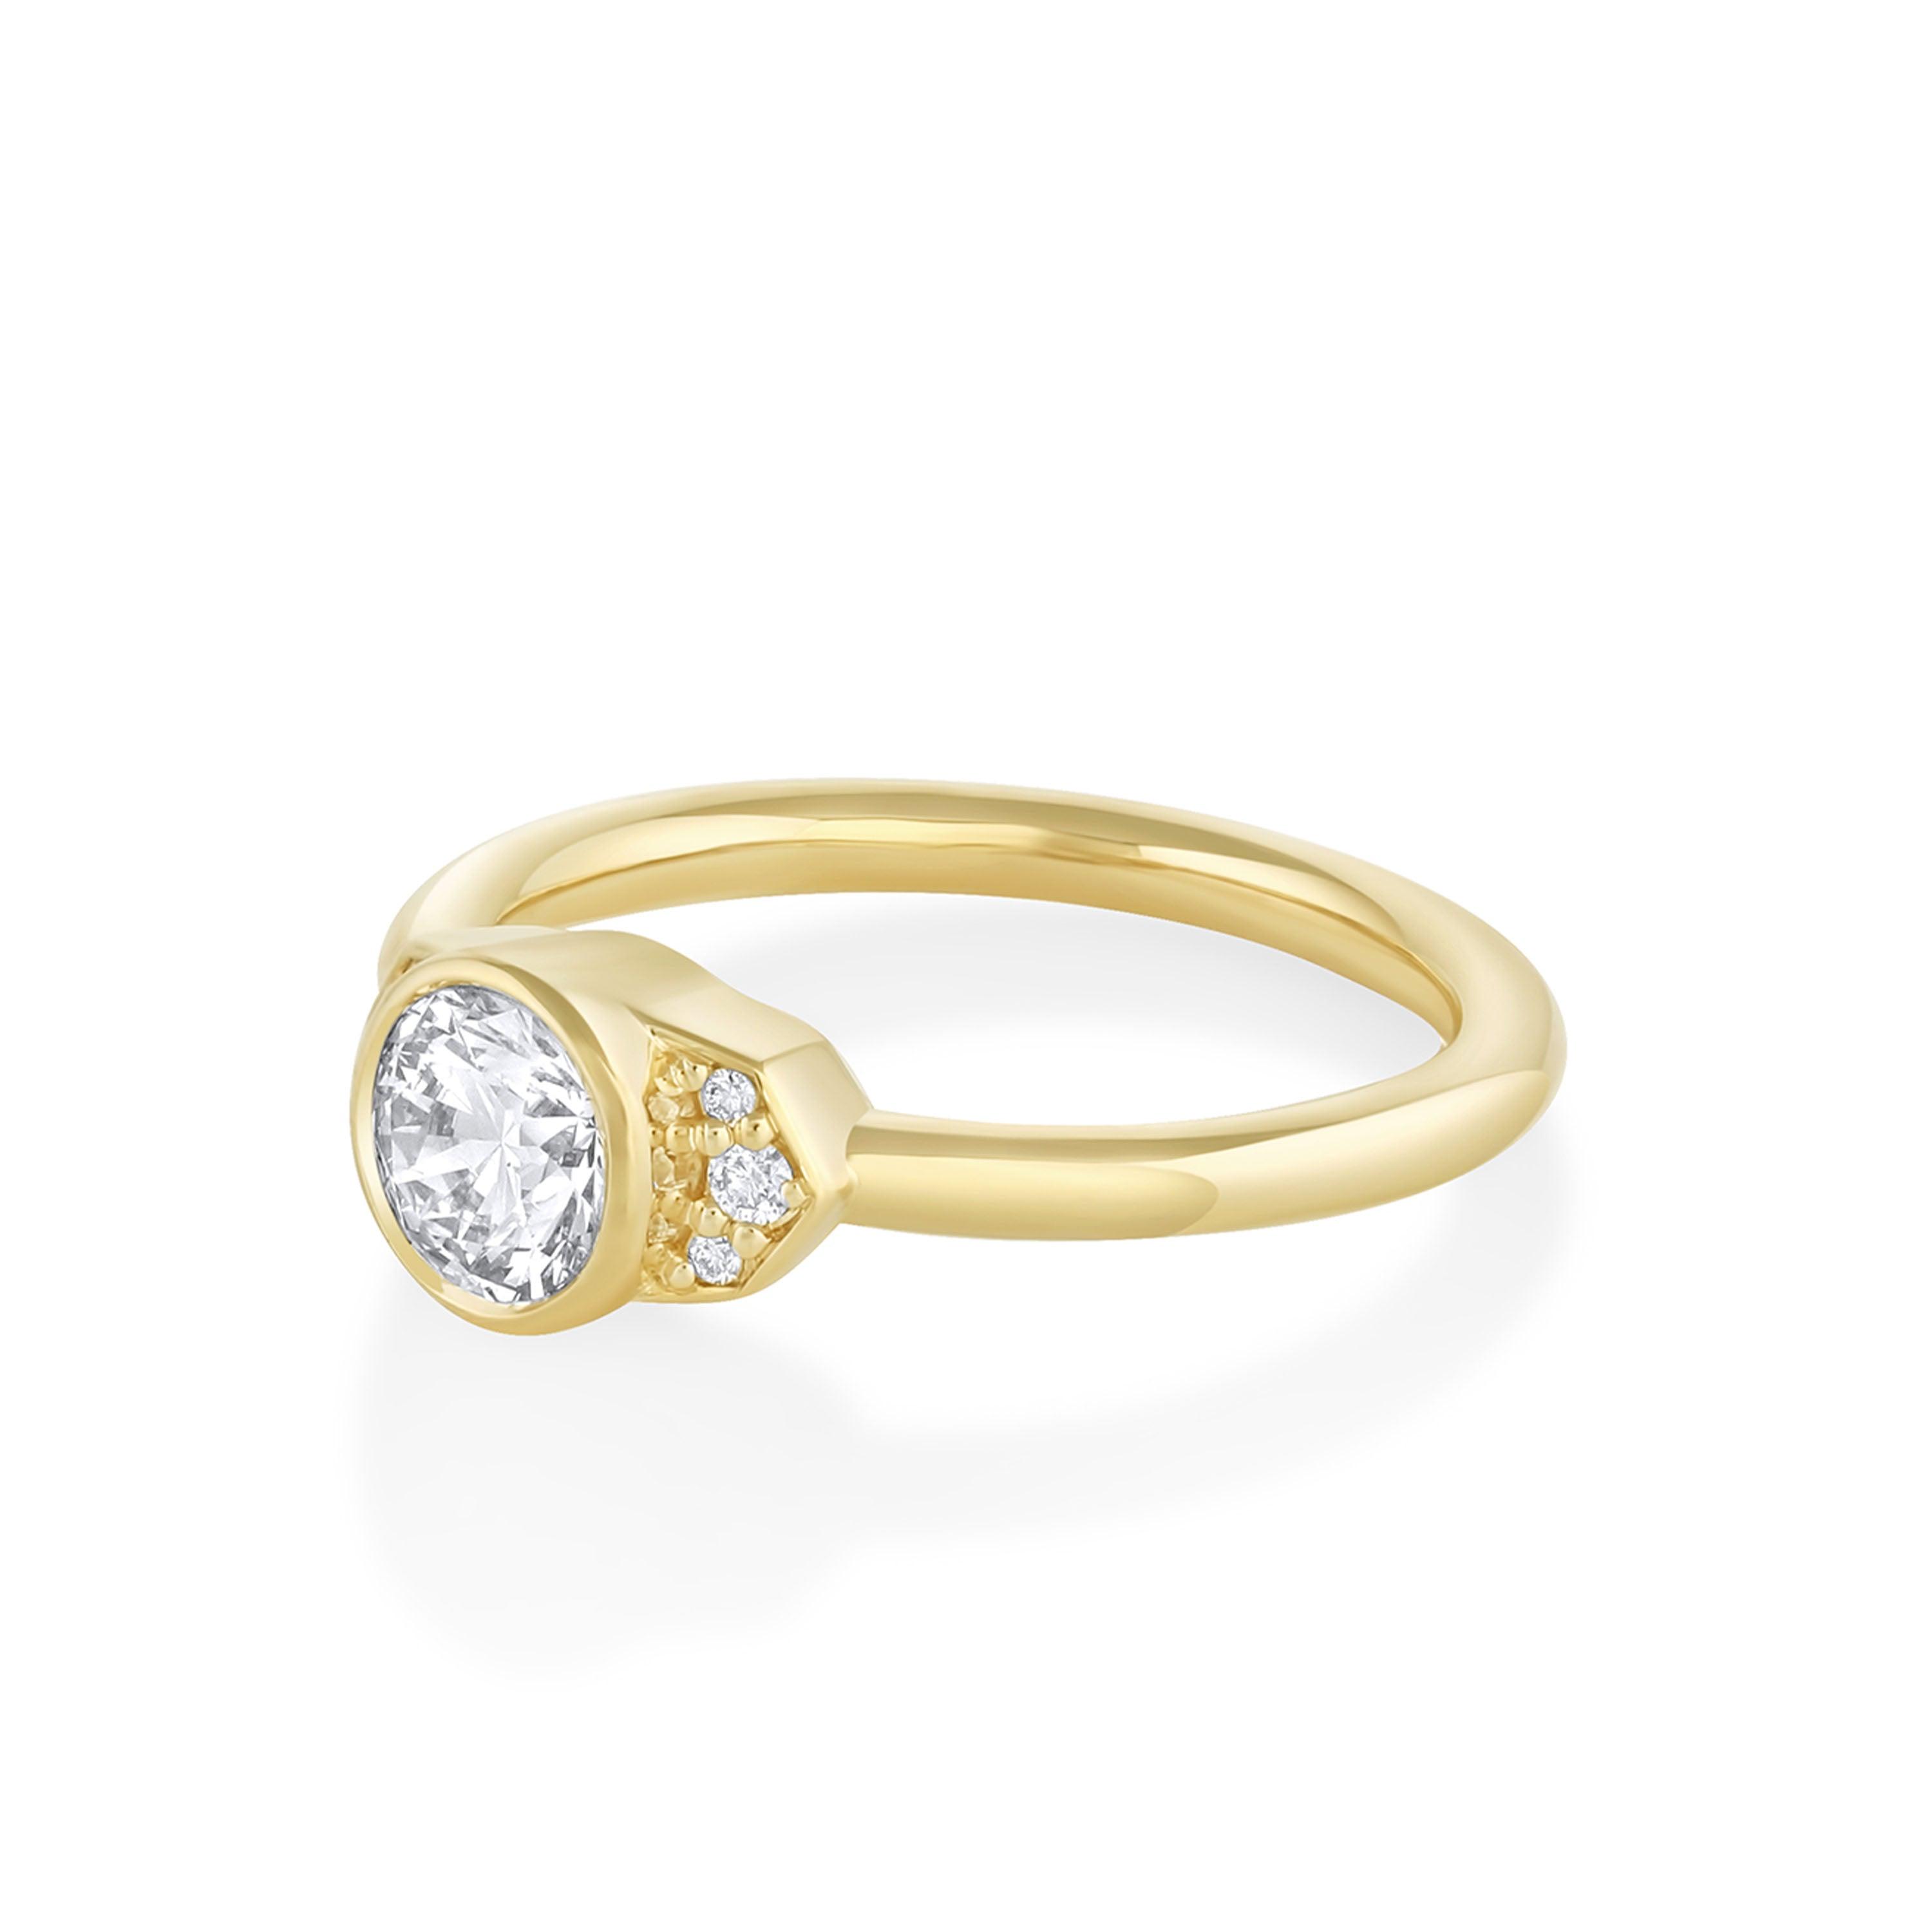 Marrow Fine Jewelry Minuette Collection Josephine Cadillac White Diamond Engagement Ring